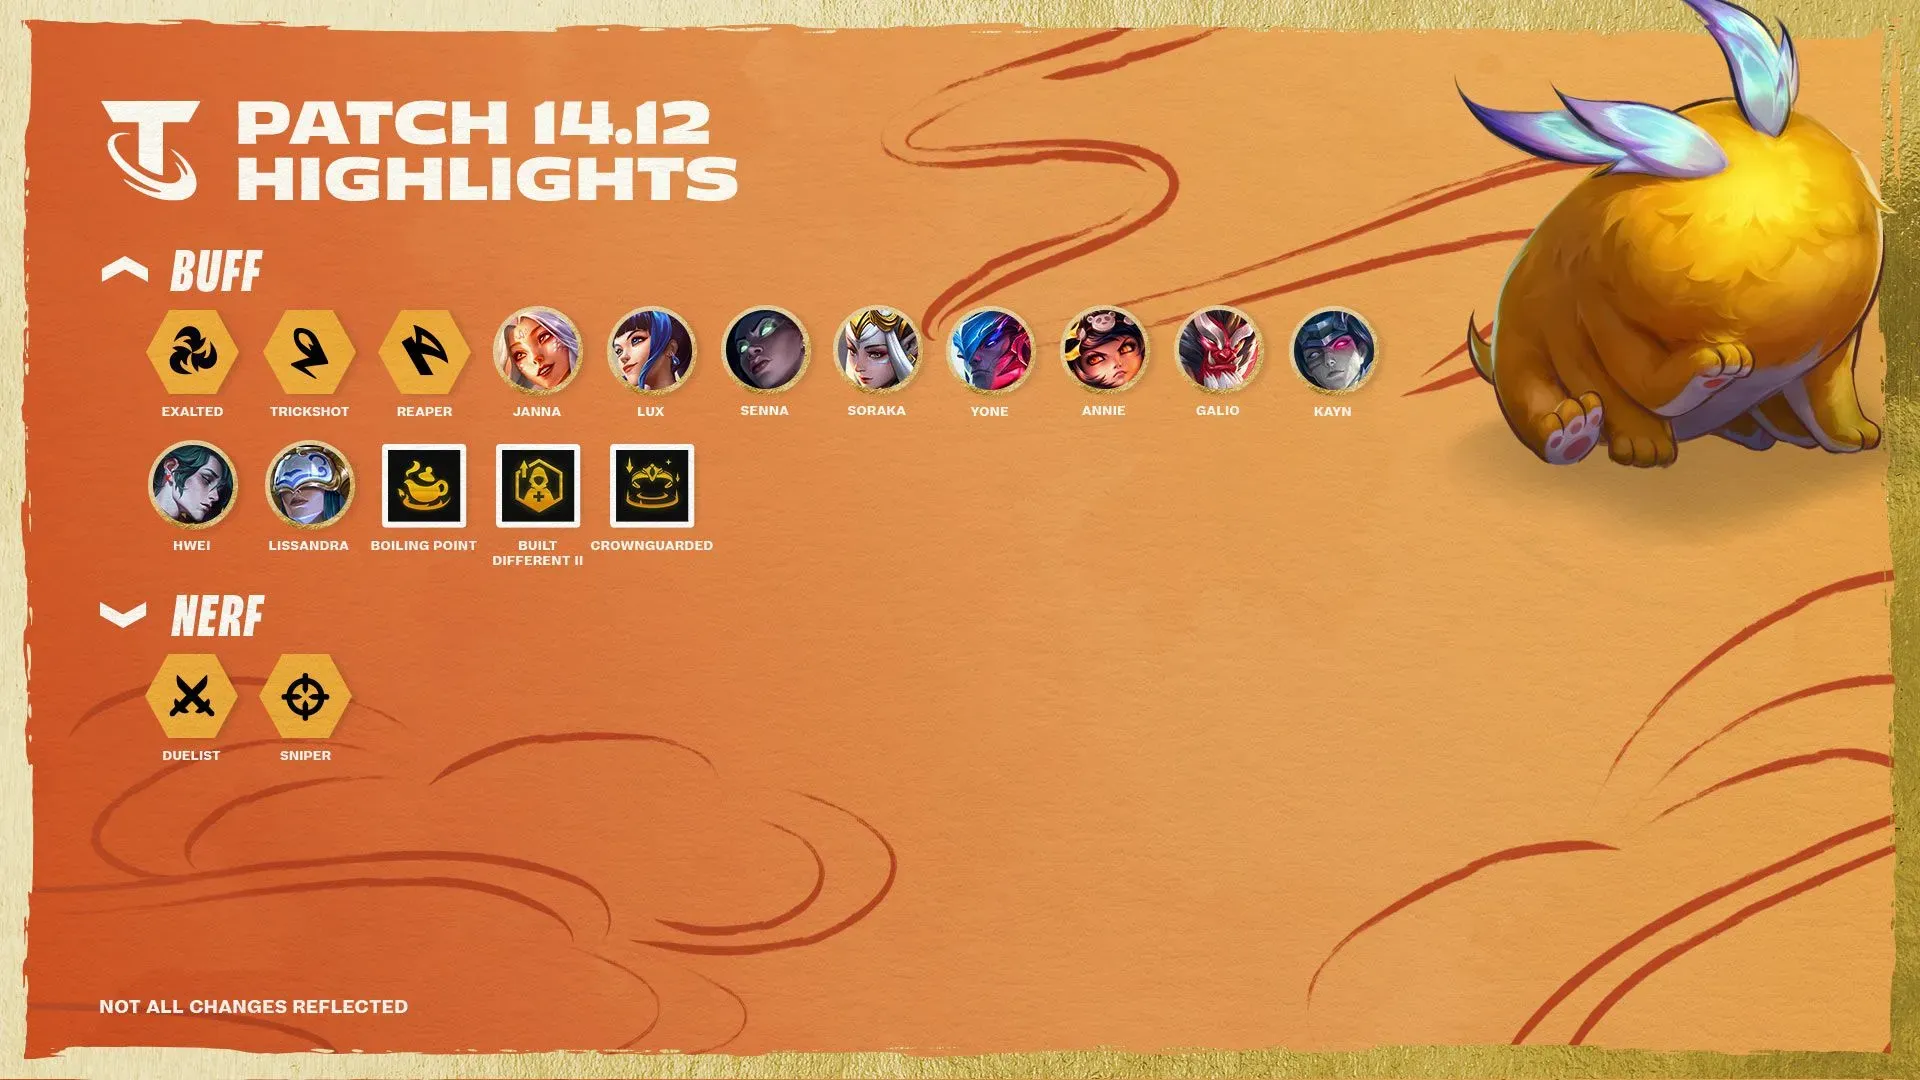 TfT PATCH HIGHLIGHTS 14.12